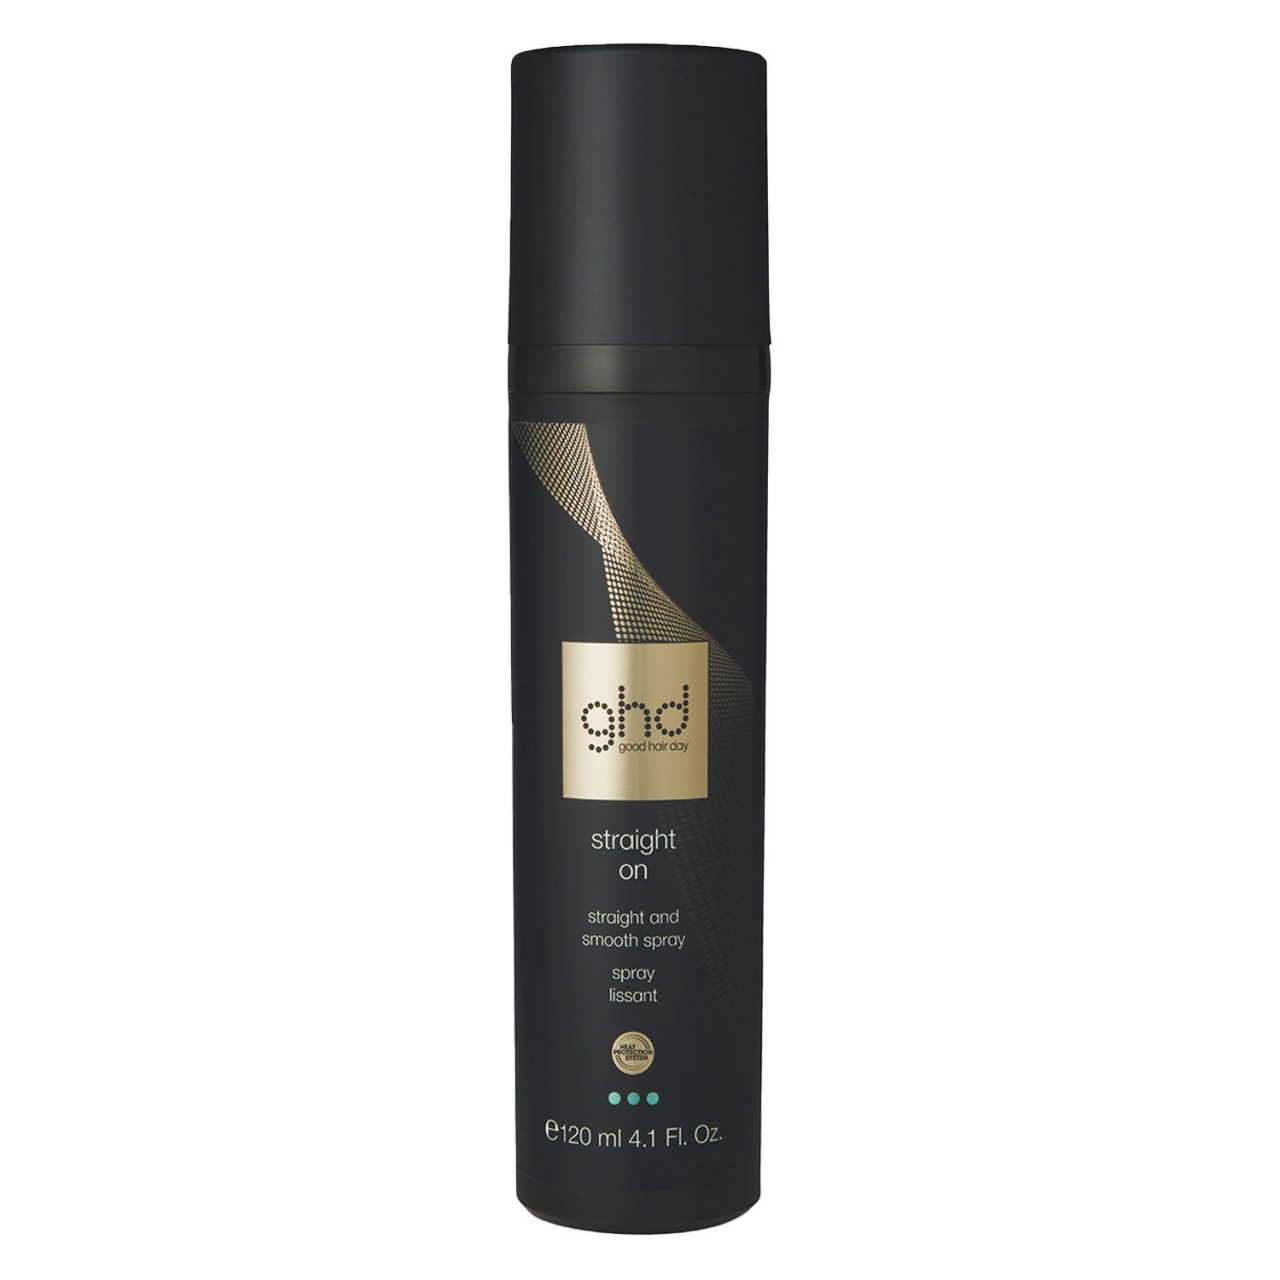 ghd Heat Protection Styling System - Straight On Straight & Smooth Spray von ghd